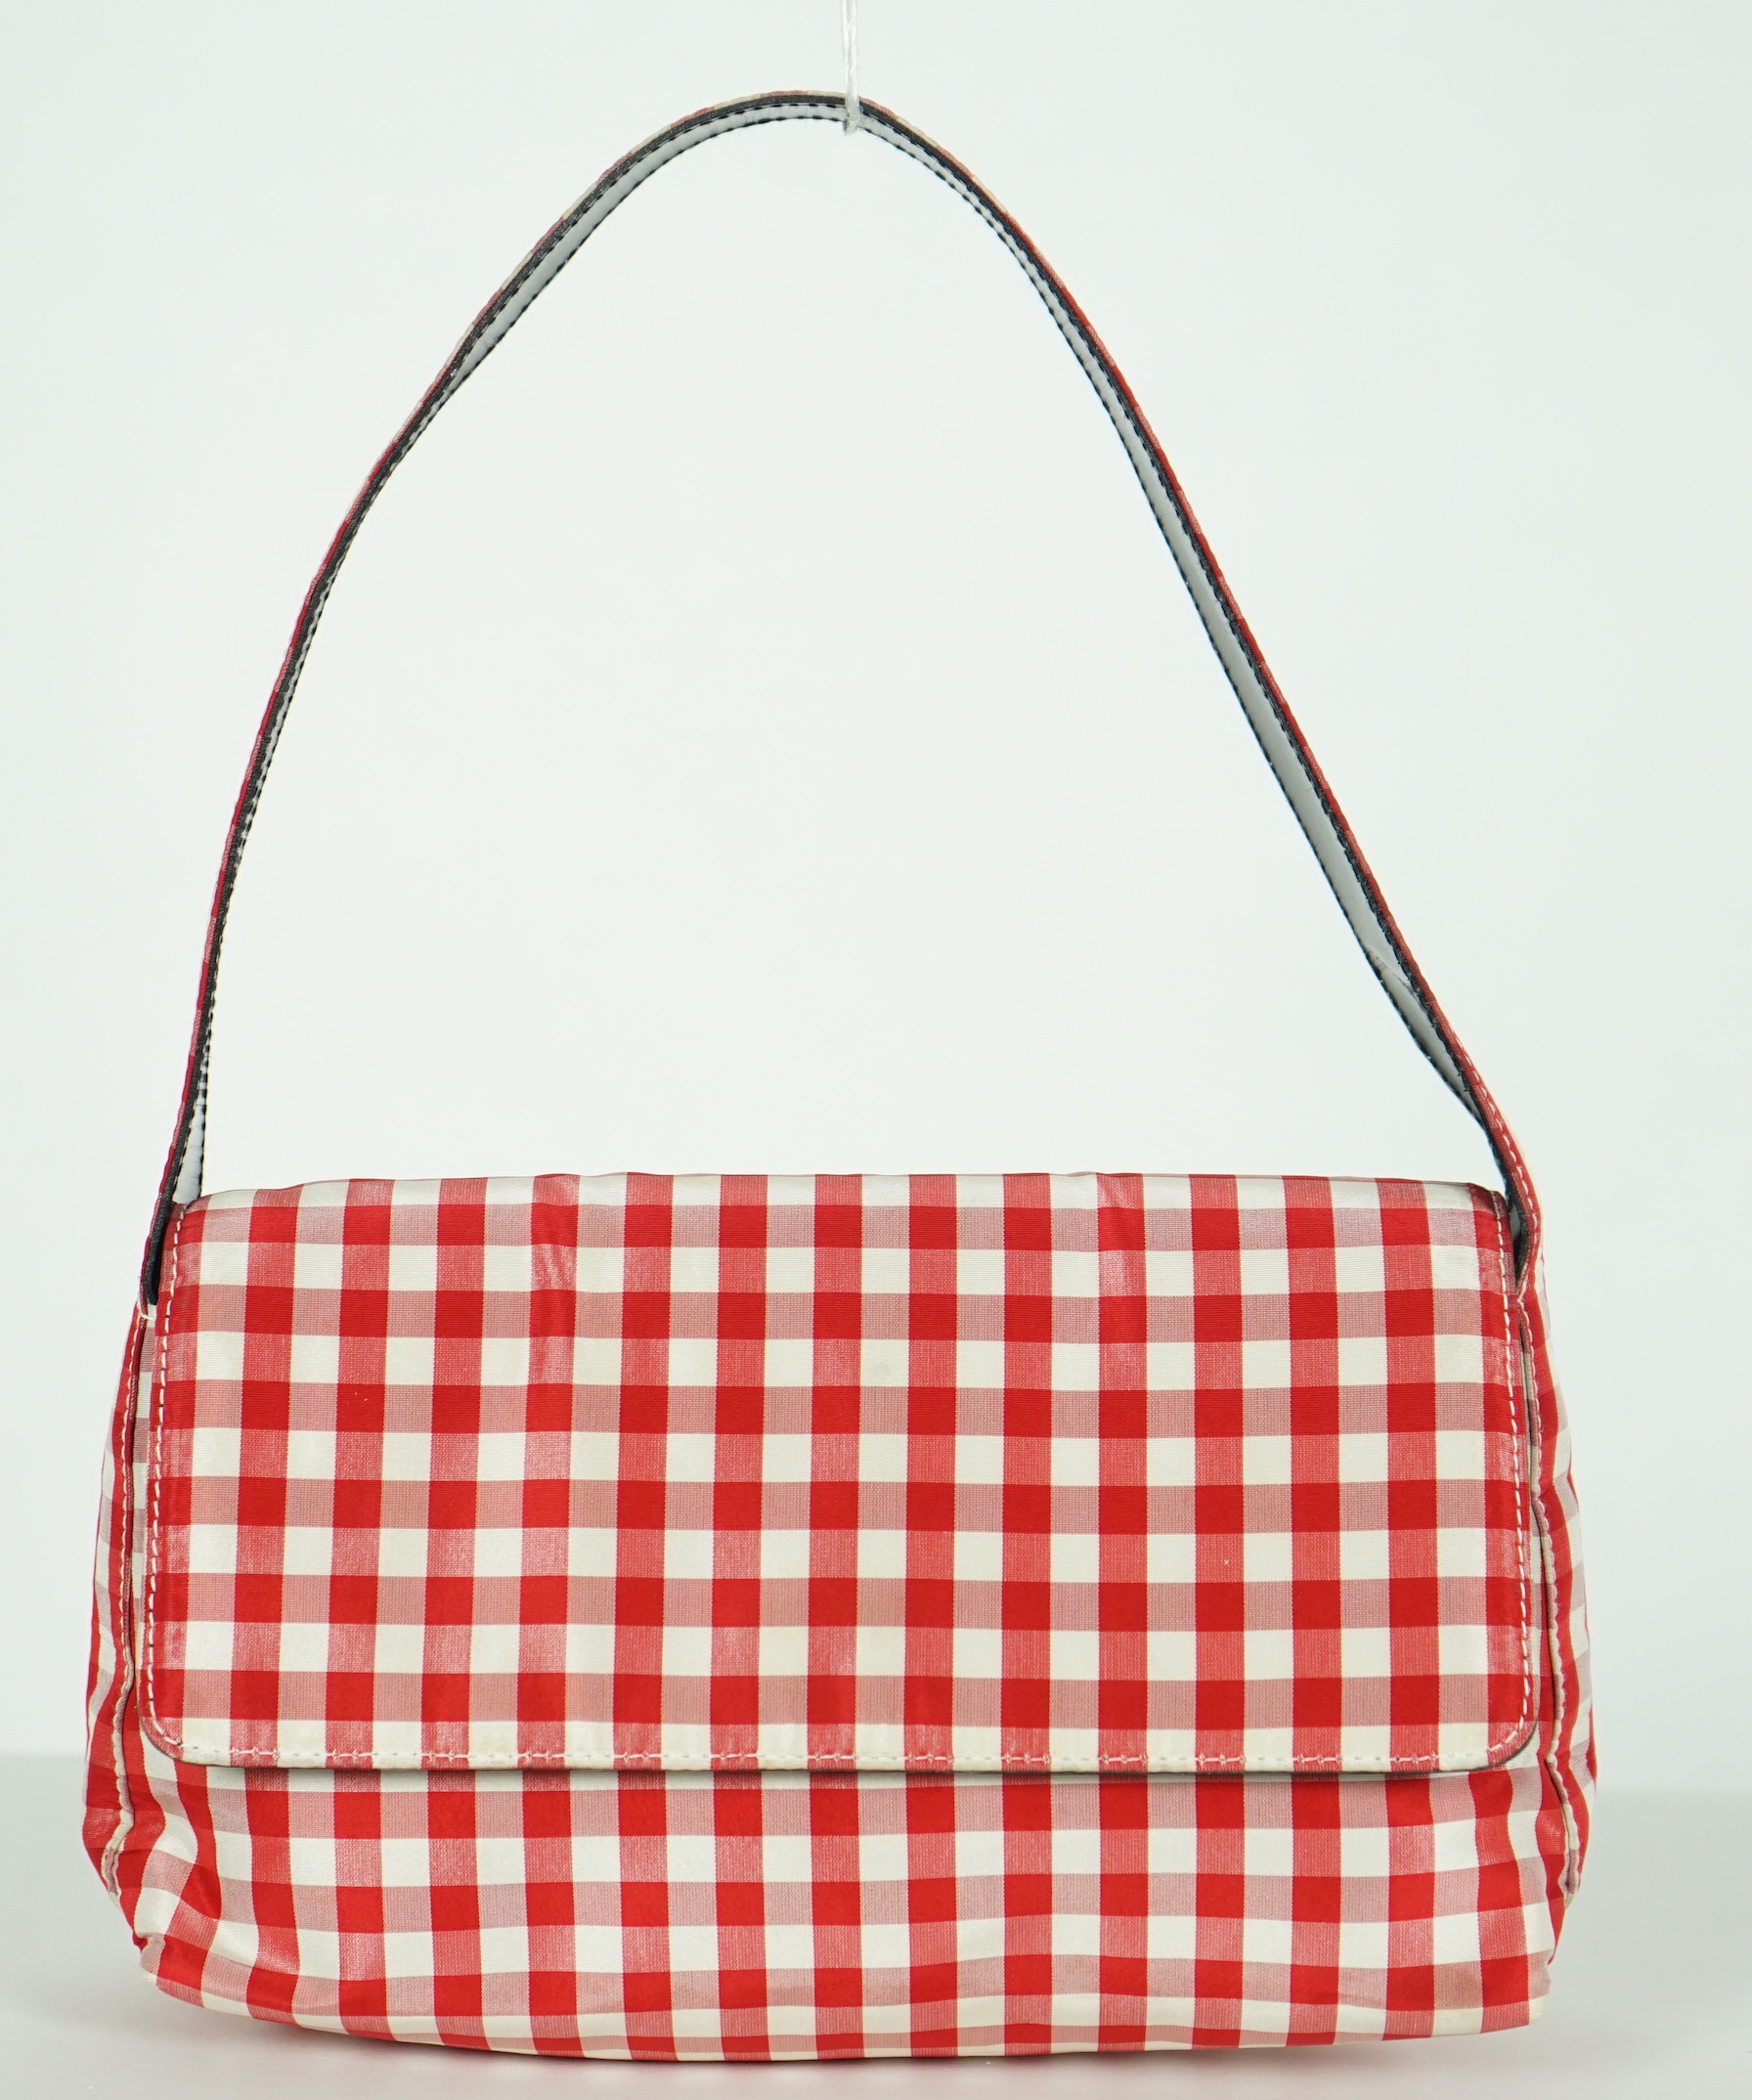 A Ralph Lauren red and white gingham satin evening bag, width 22cm, height 14cm, overall height 30cm, depth 5cm